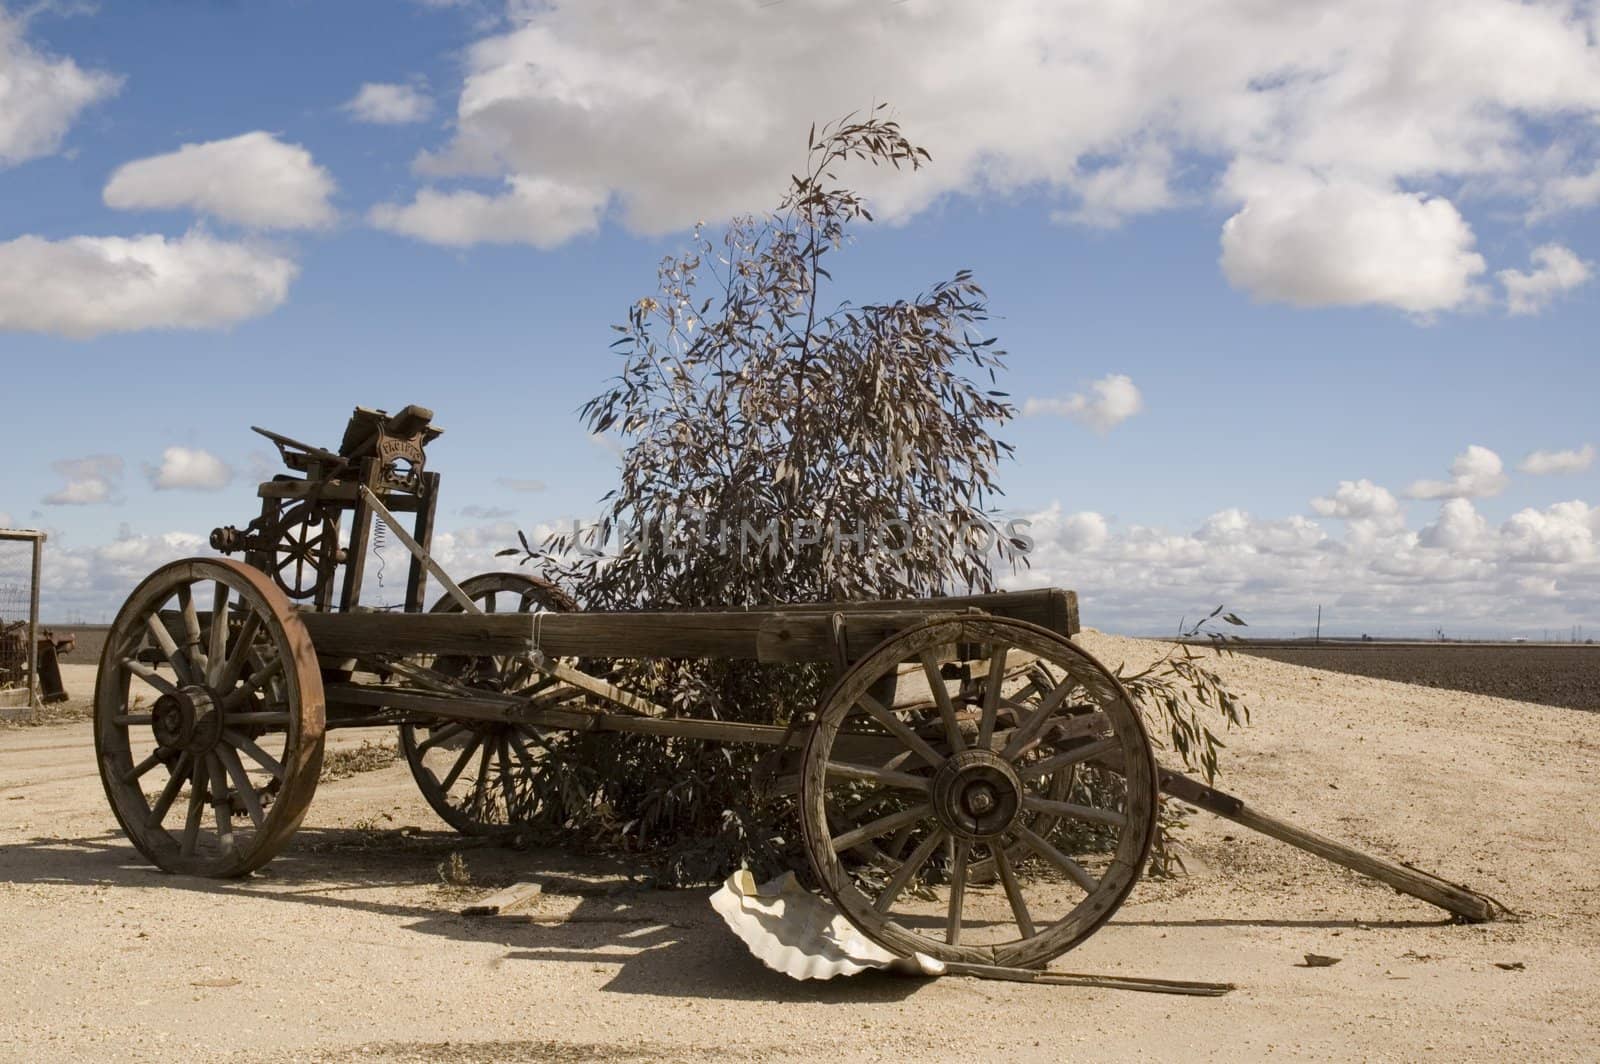 Old agricultural wagon on a farm in California with cumulus clouds in background